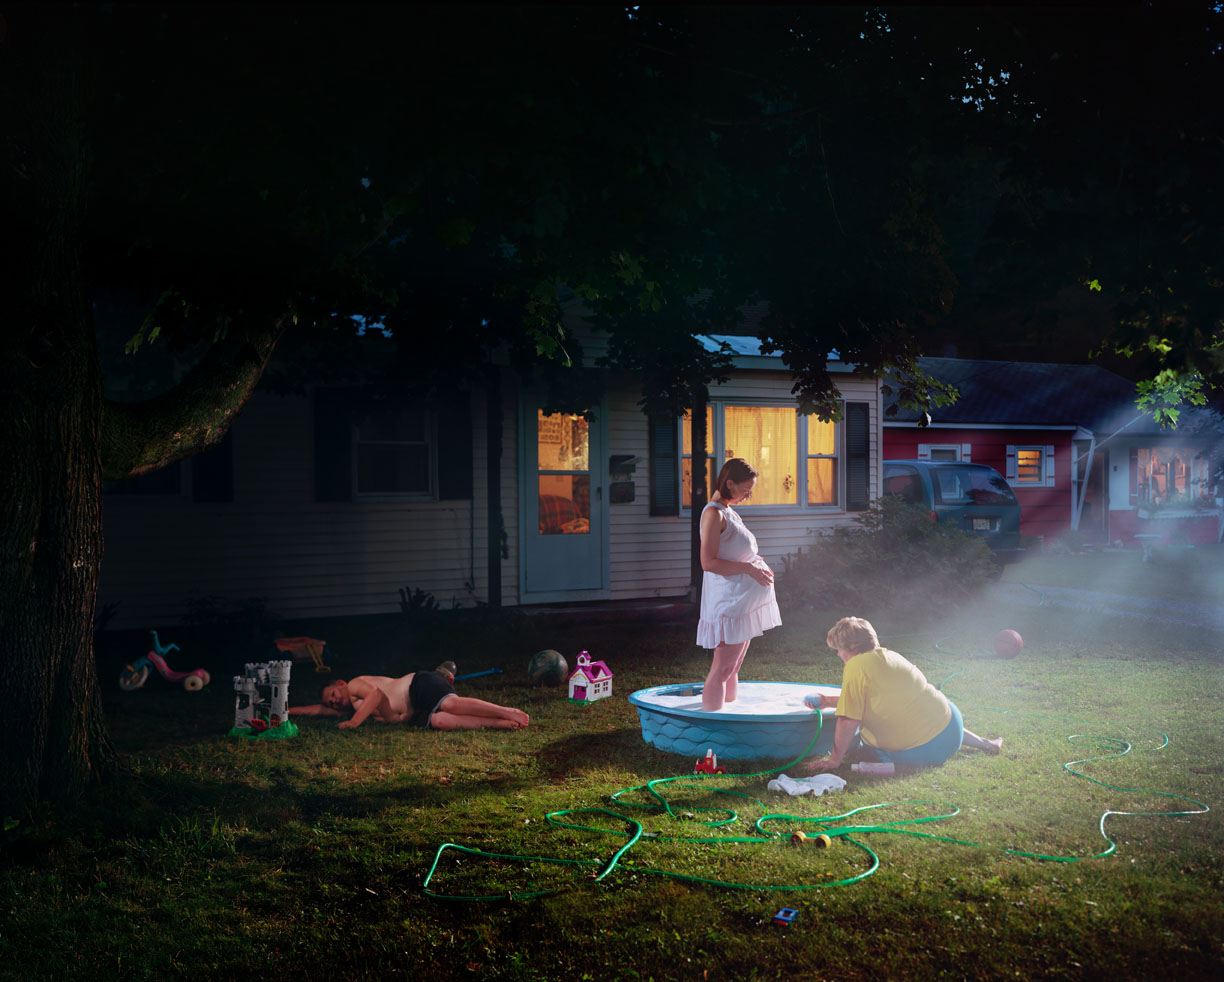 By Gregory Crewdson